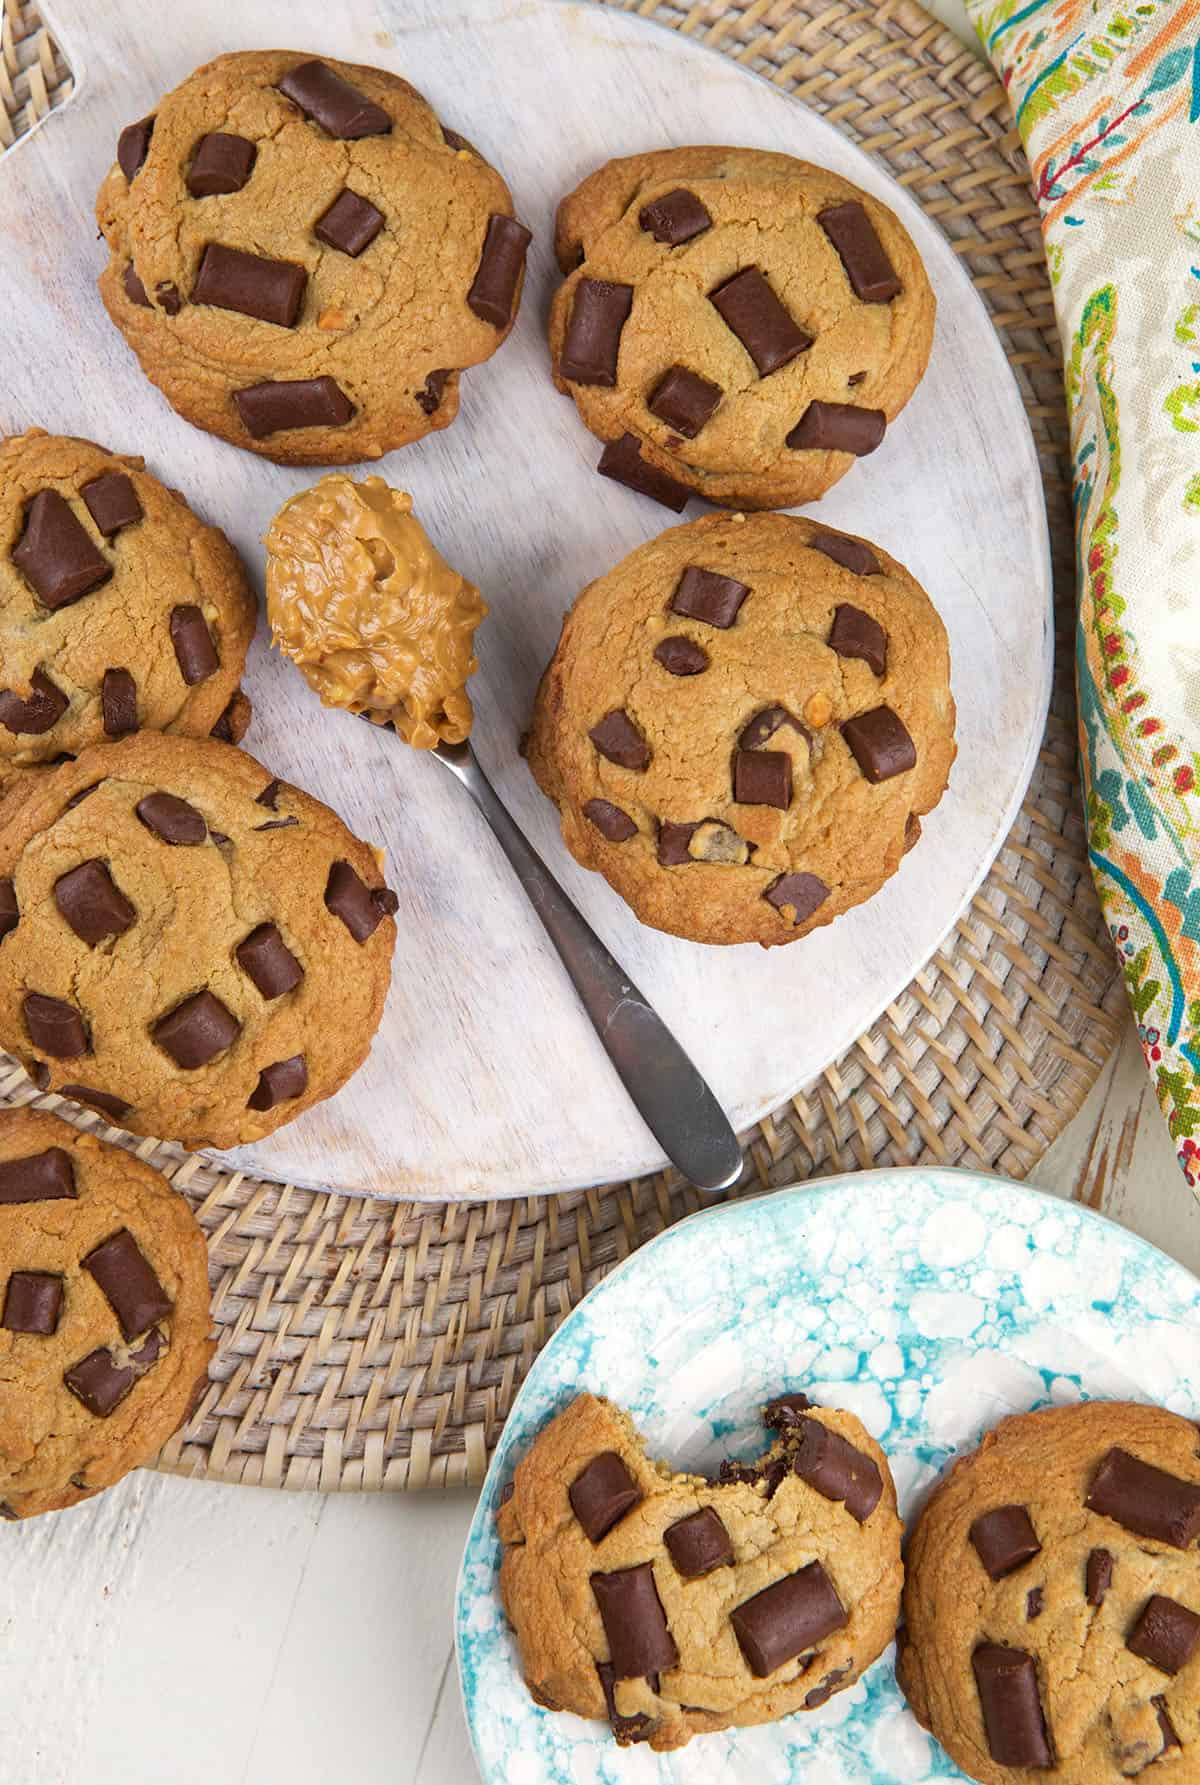 A spoon with peanut butter on it is placed next to a batch of peanut butter chocolate chip cookies. 